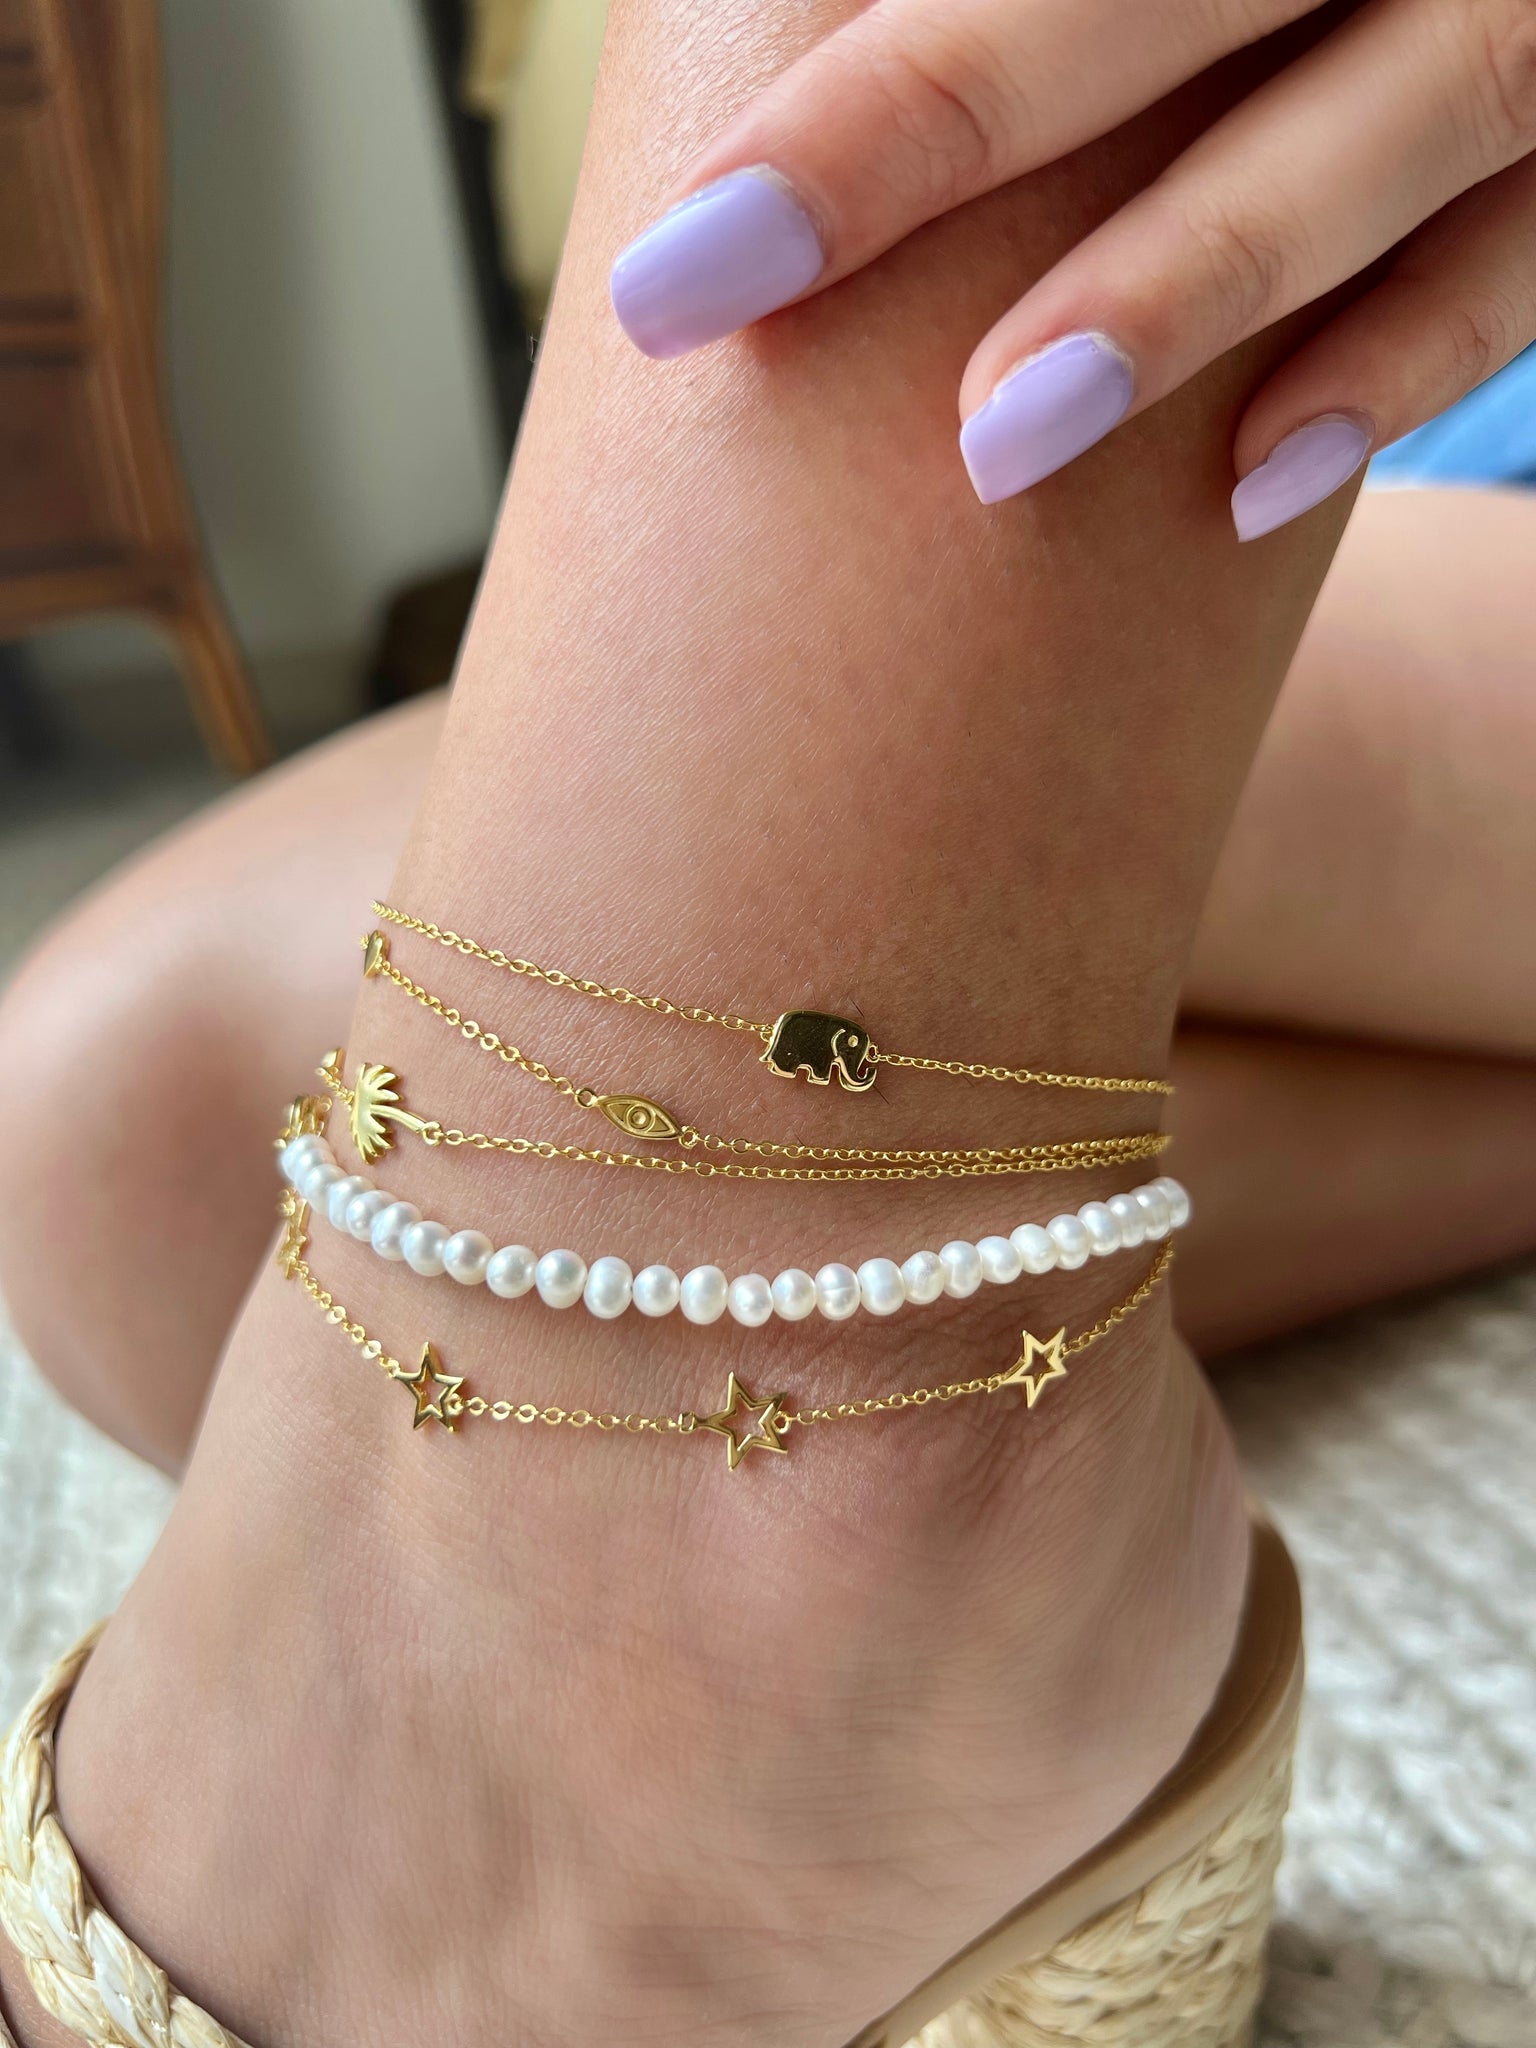 Fashion Crystal Anklets Gold Silver Ankle Bracelet Women Link Chain Foot  Jewelry | eBay